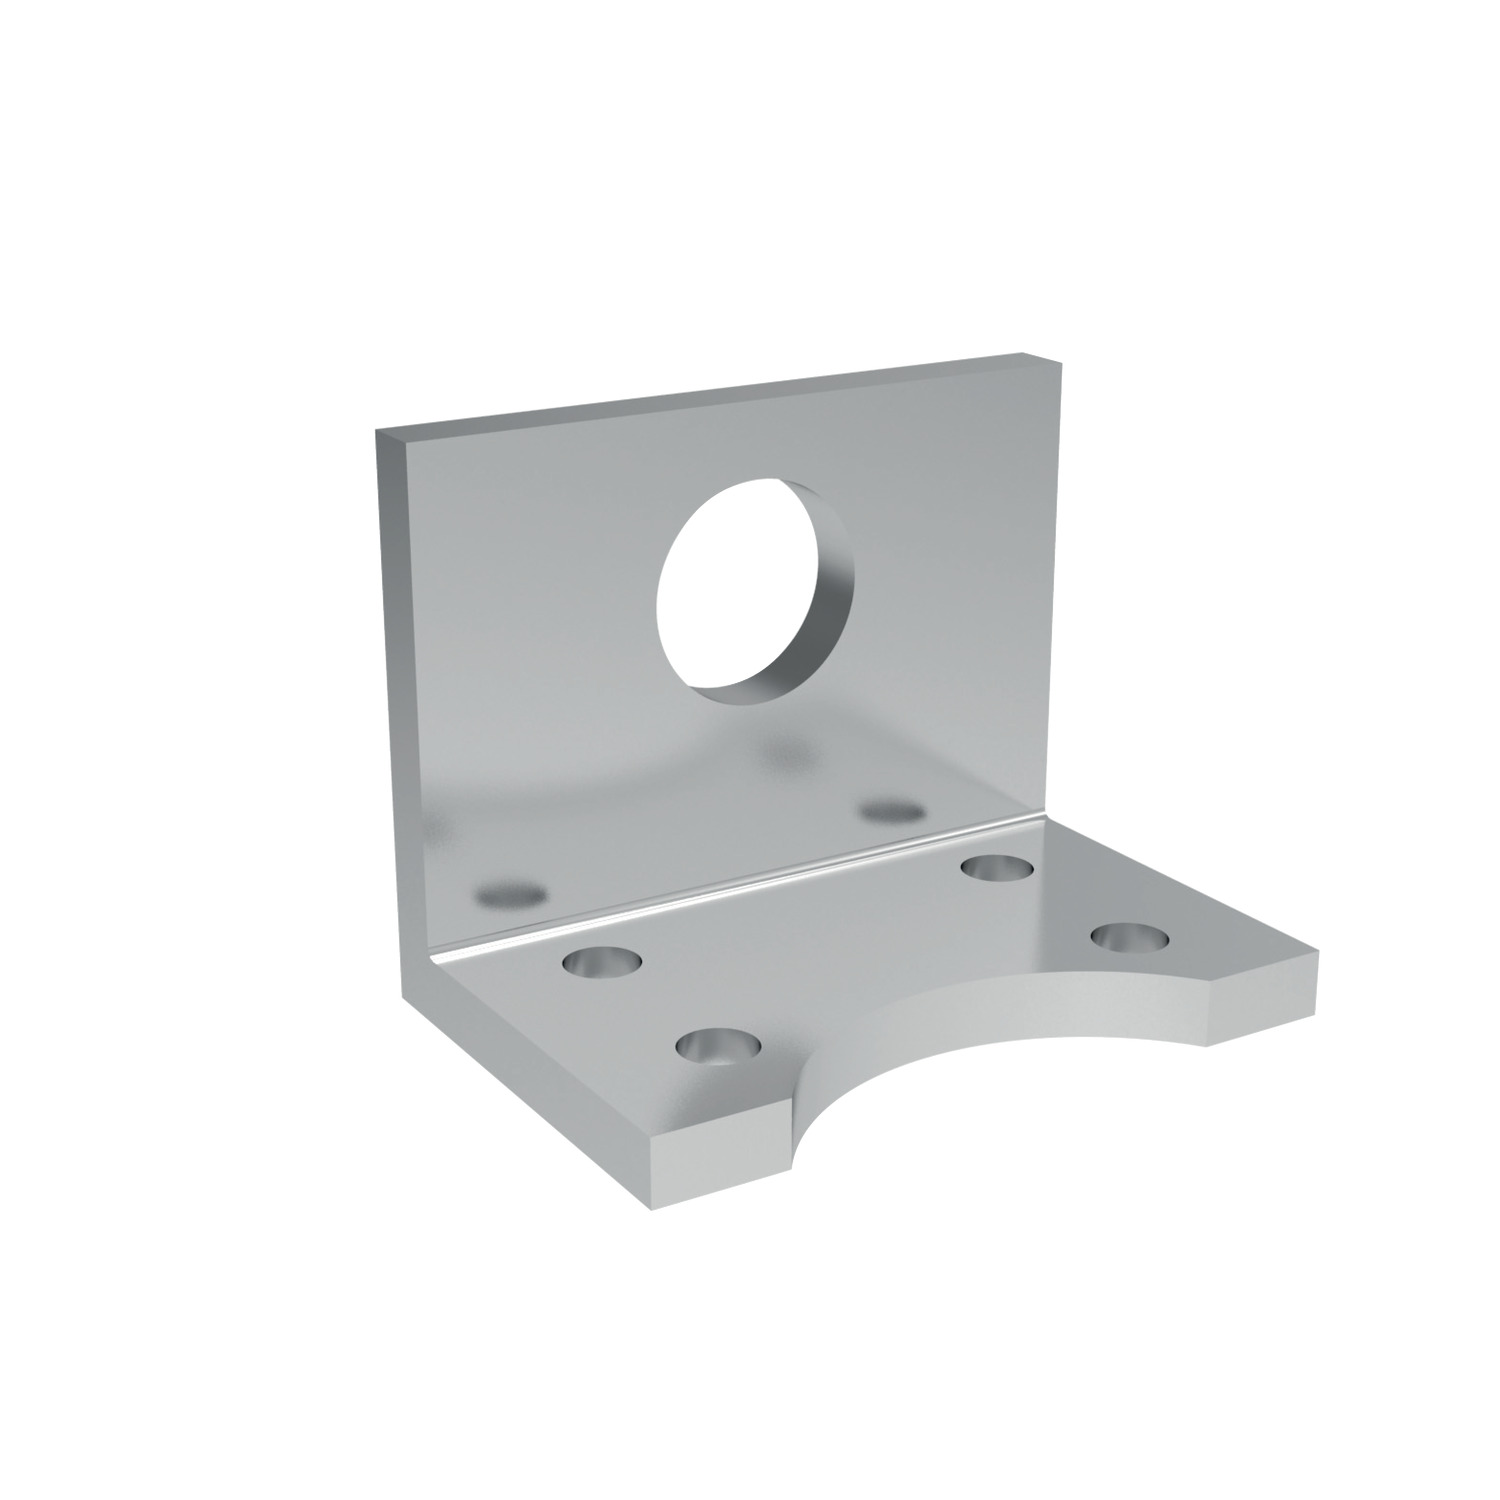 Product 41880.4, Angle Plates stainless steel - for no's. 41840 and 41890 / 